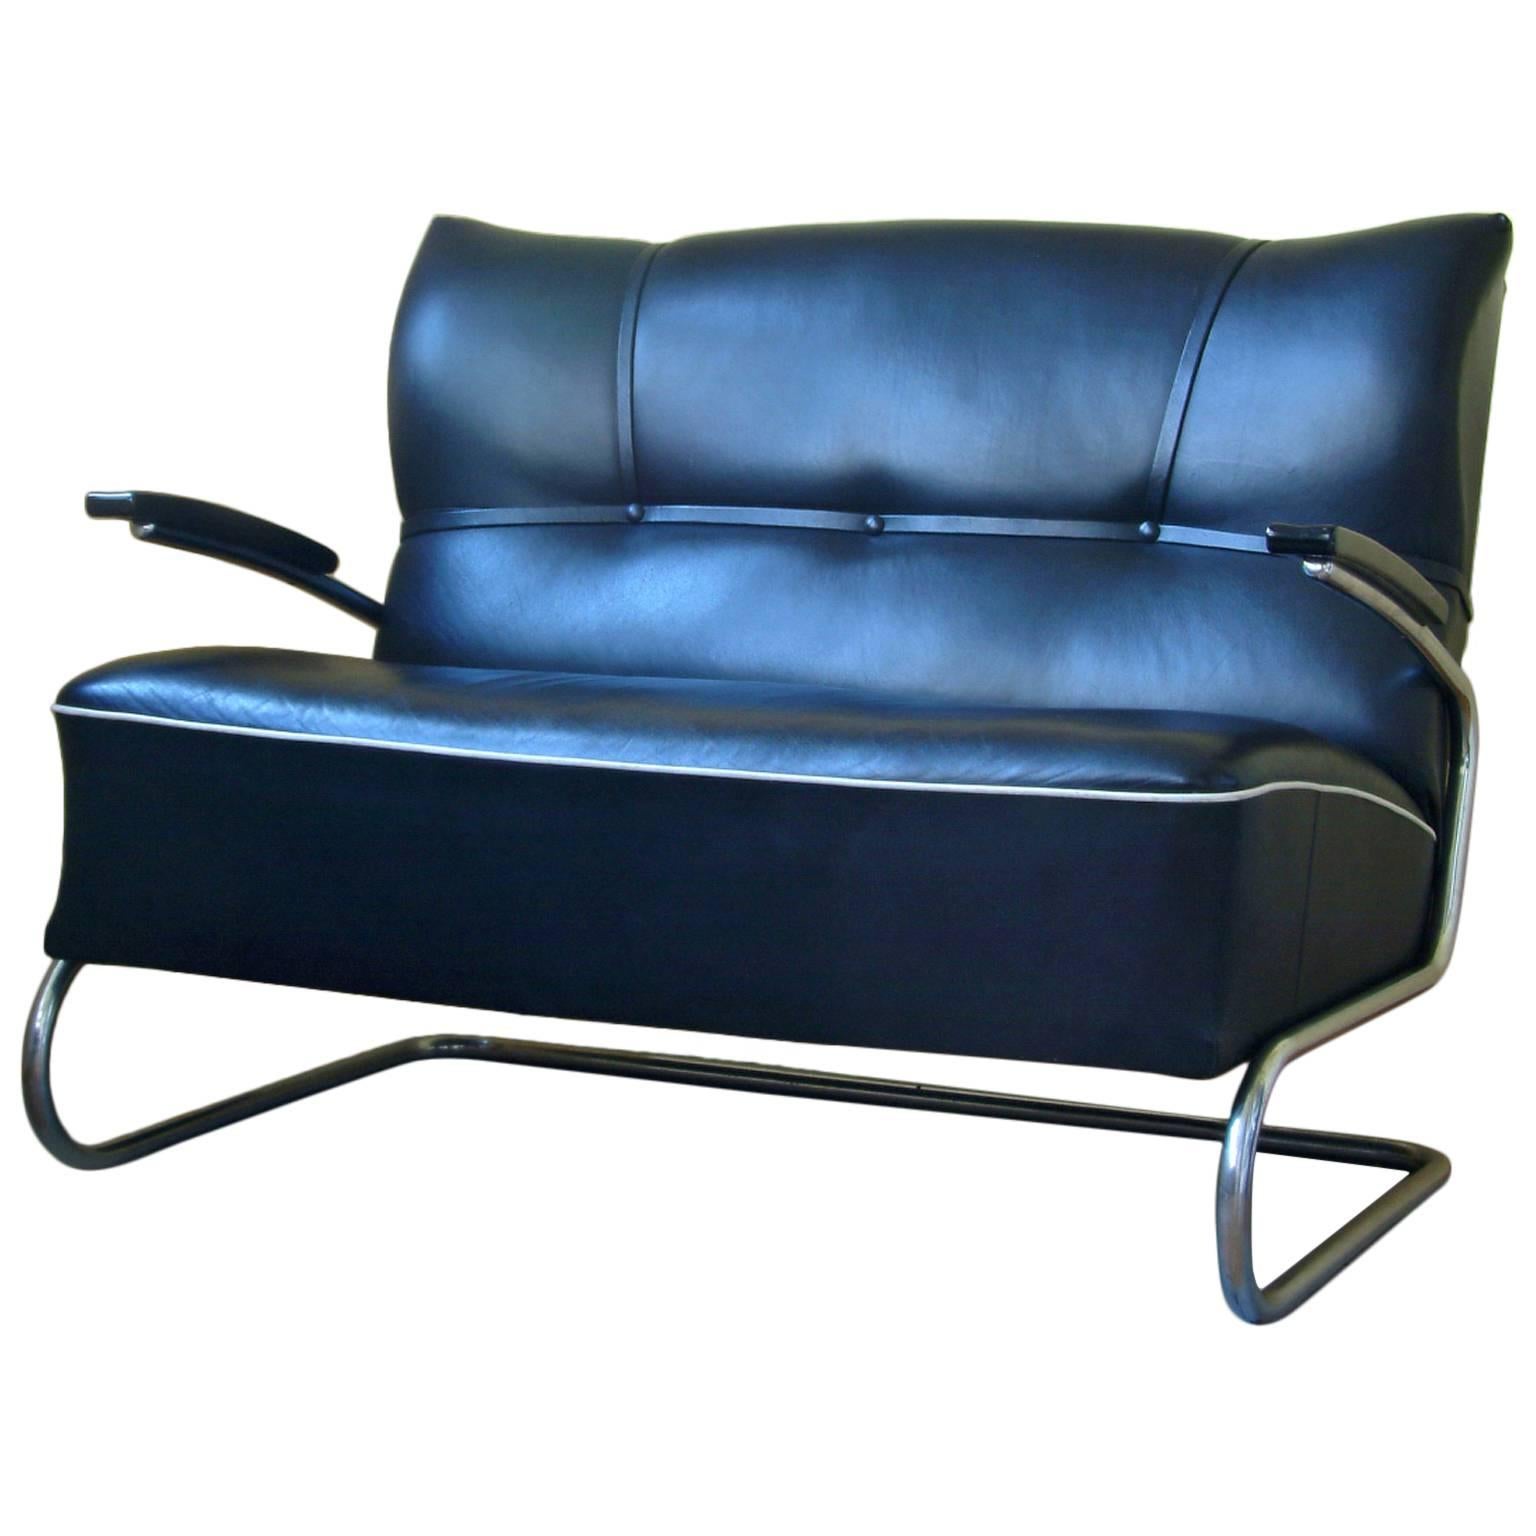 Two-Seat Tubular Steel Cantilever Couch, German Modernism, circa 1940 For Sale